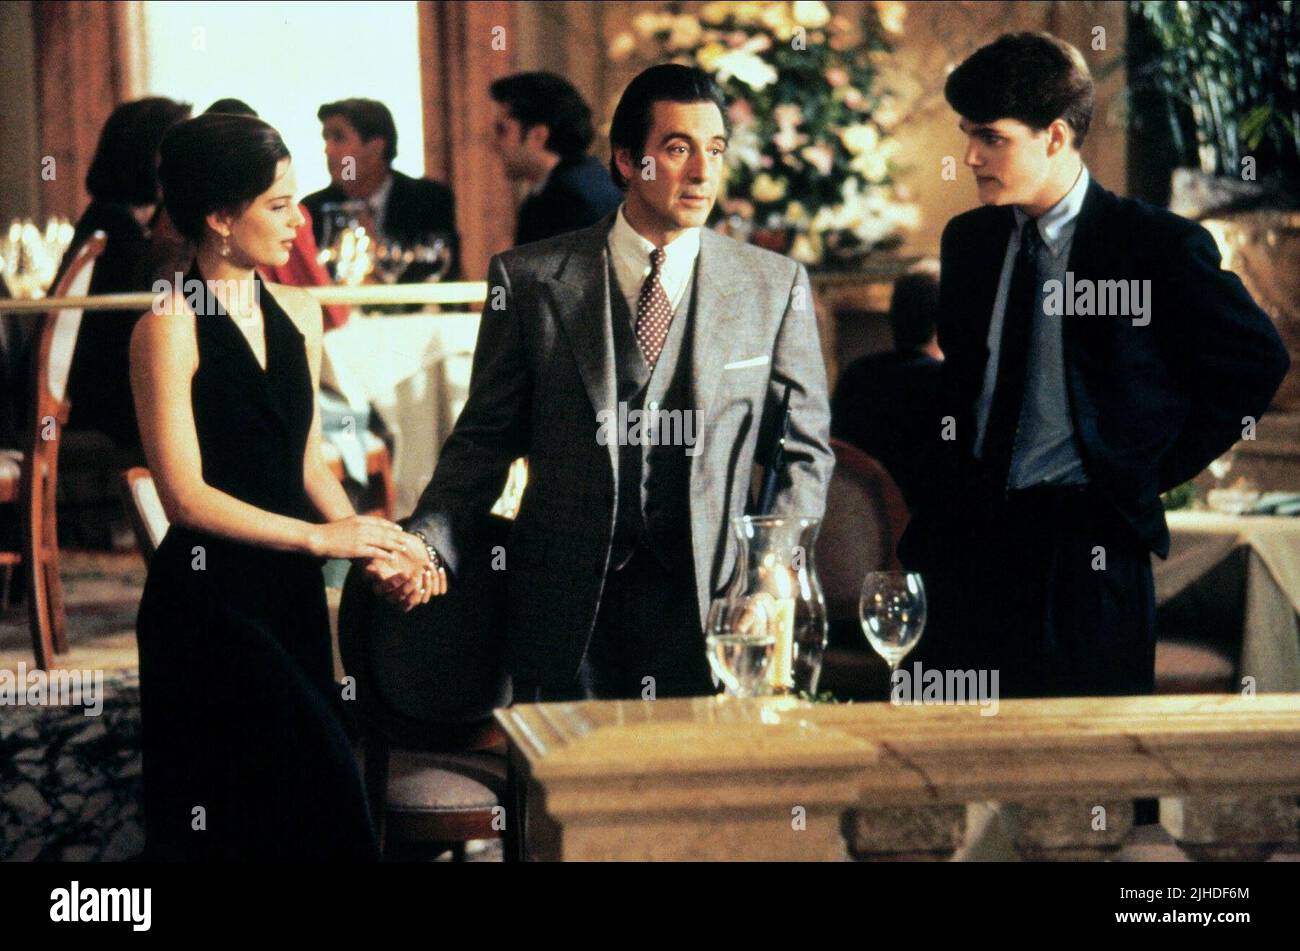 GABRIELLE ANWAR, AL PACINO, CHRIS O'DONNELL, SCENT OF A WOMAN, 1992 Stock Photo